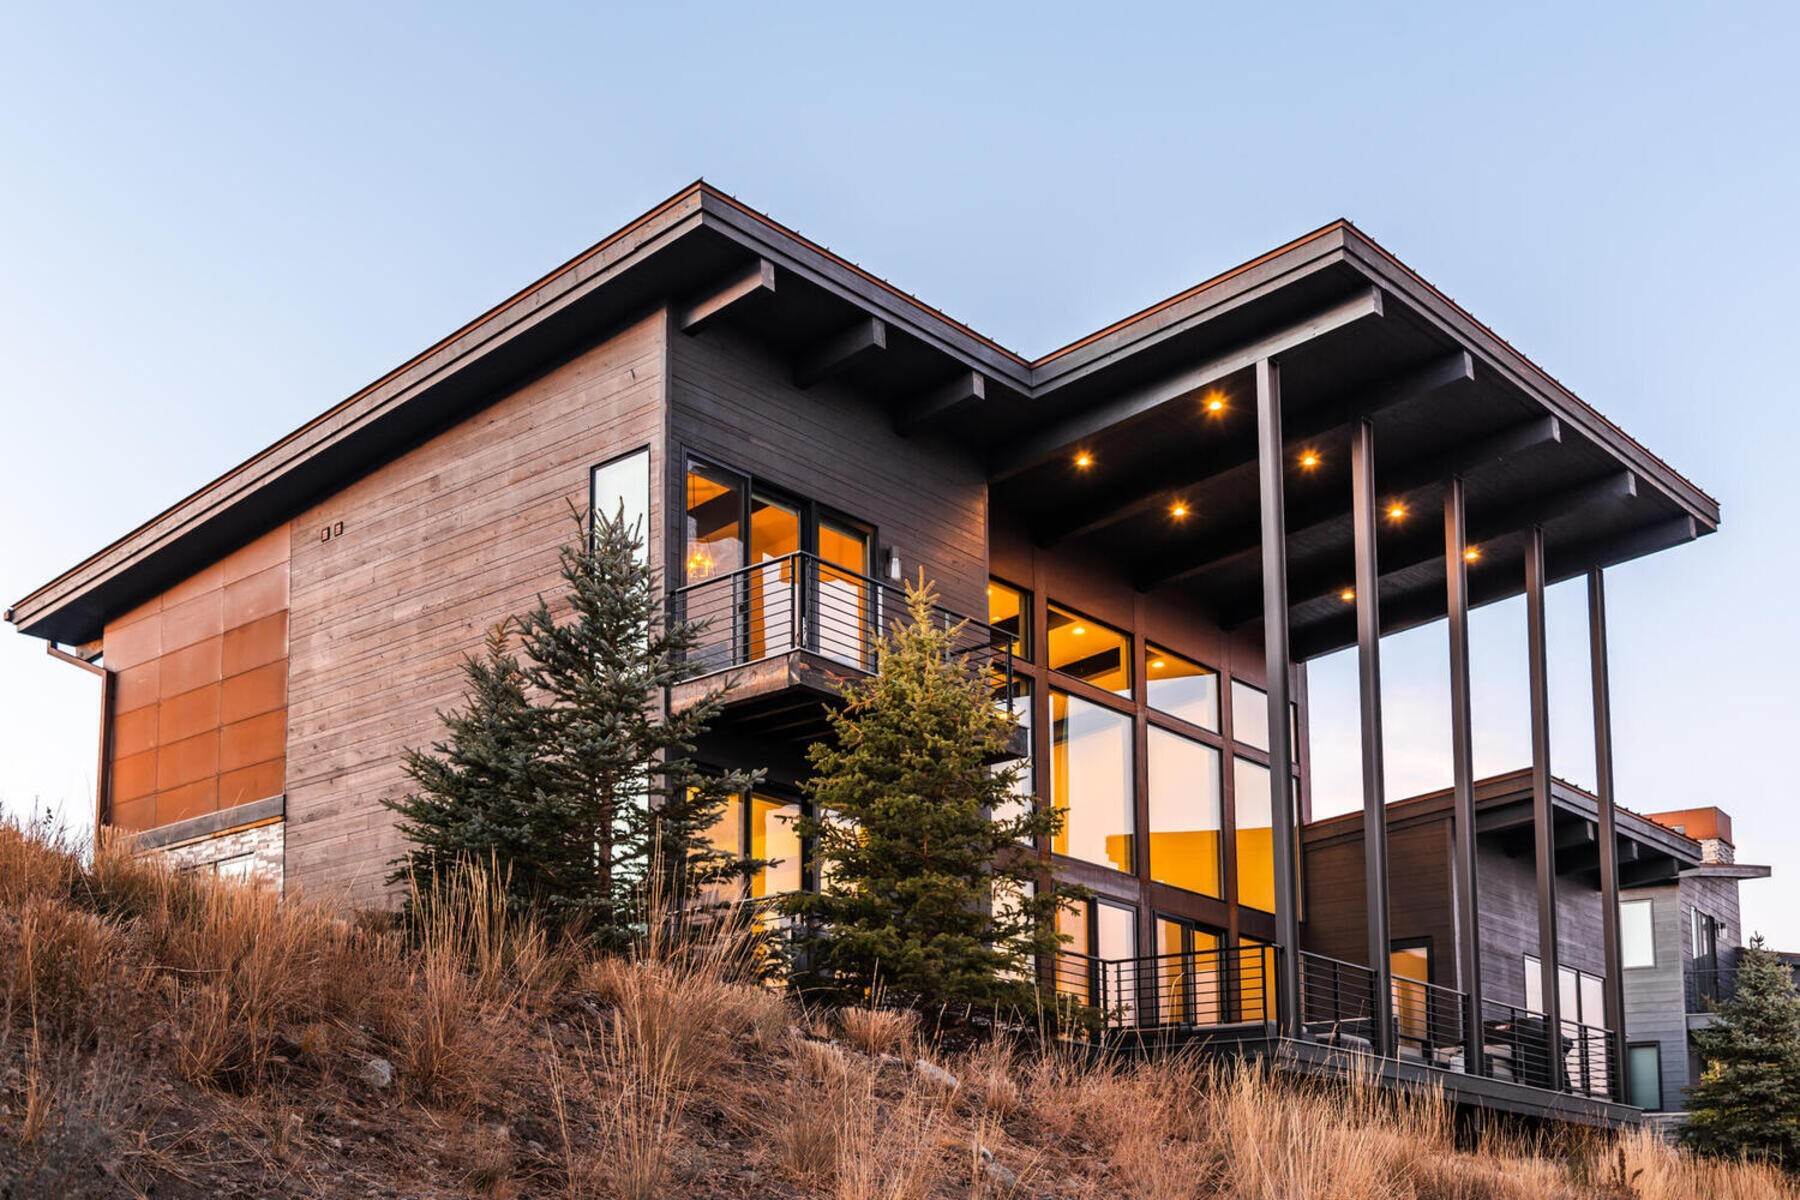 Single Family Homes for Sale at Gorgeous Mountain Modern Villa at Promontory 6684 Golden Bear Loop West Park City, Utah 84098 United States